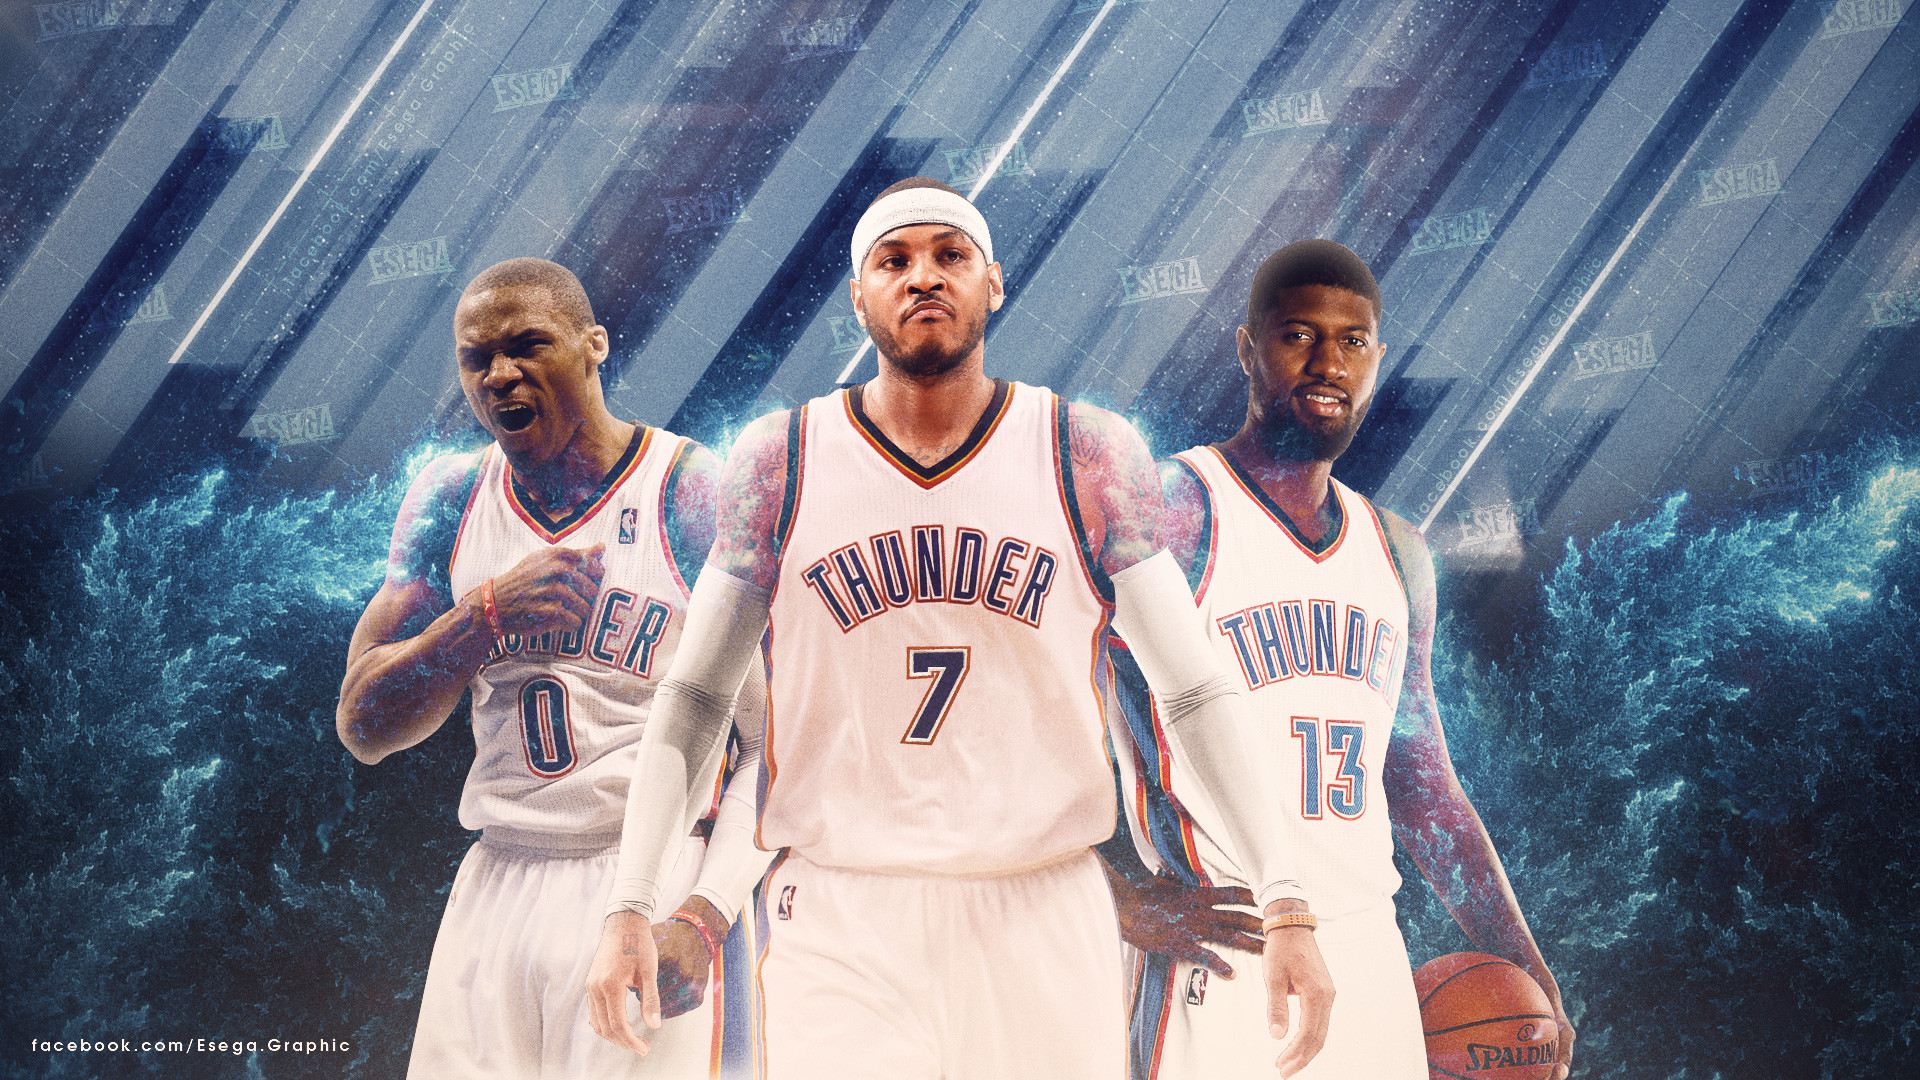 Carmelo Anthony Wallpaper HD The Best Image In